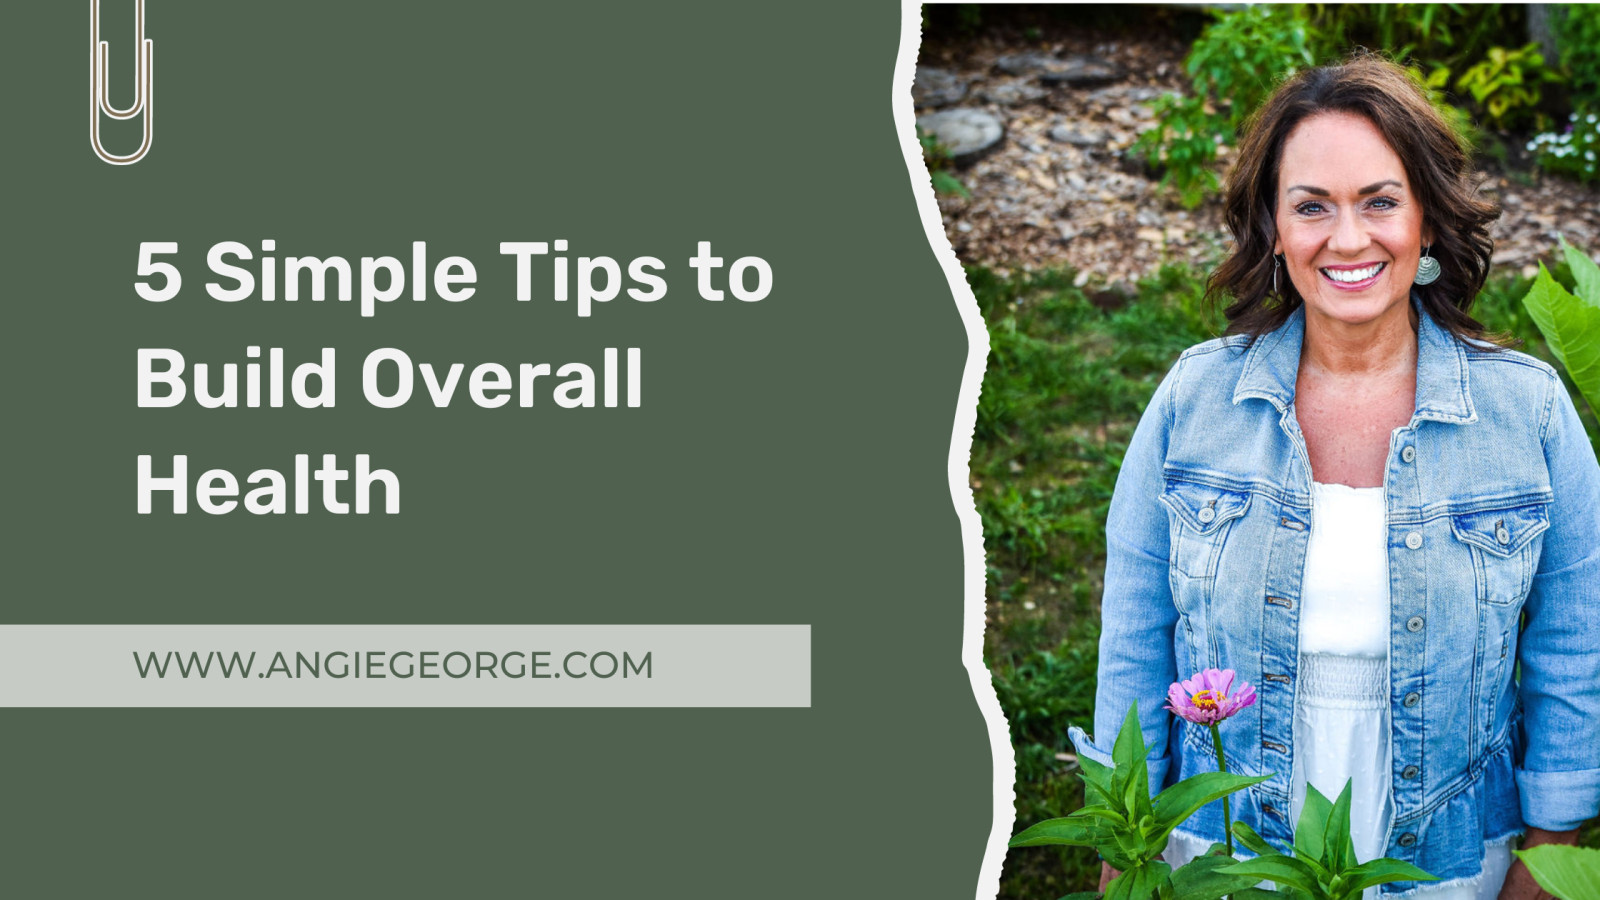 5 Simple Tips to Build Overall Health